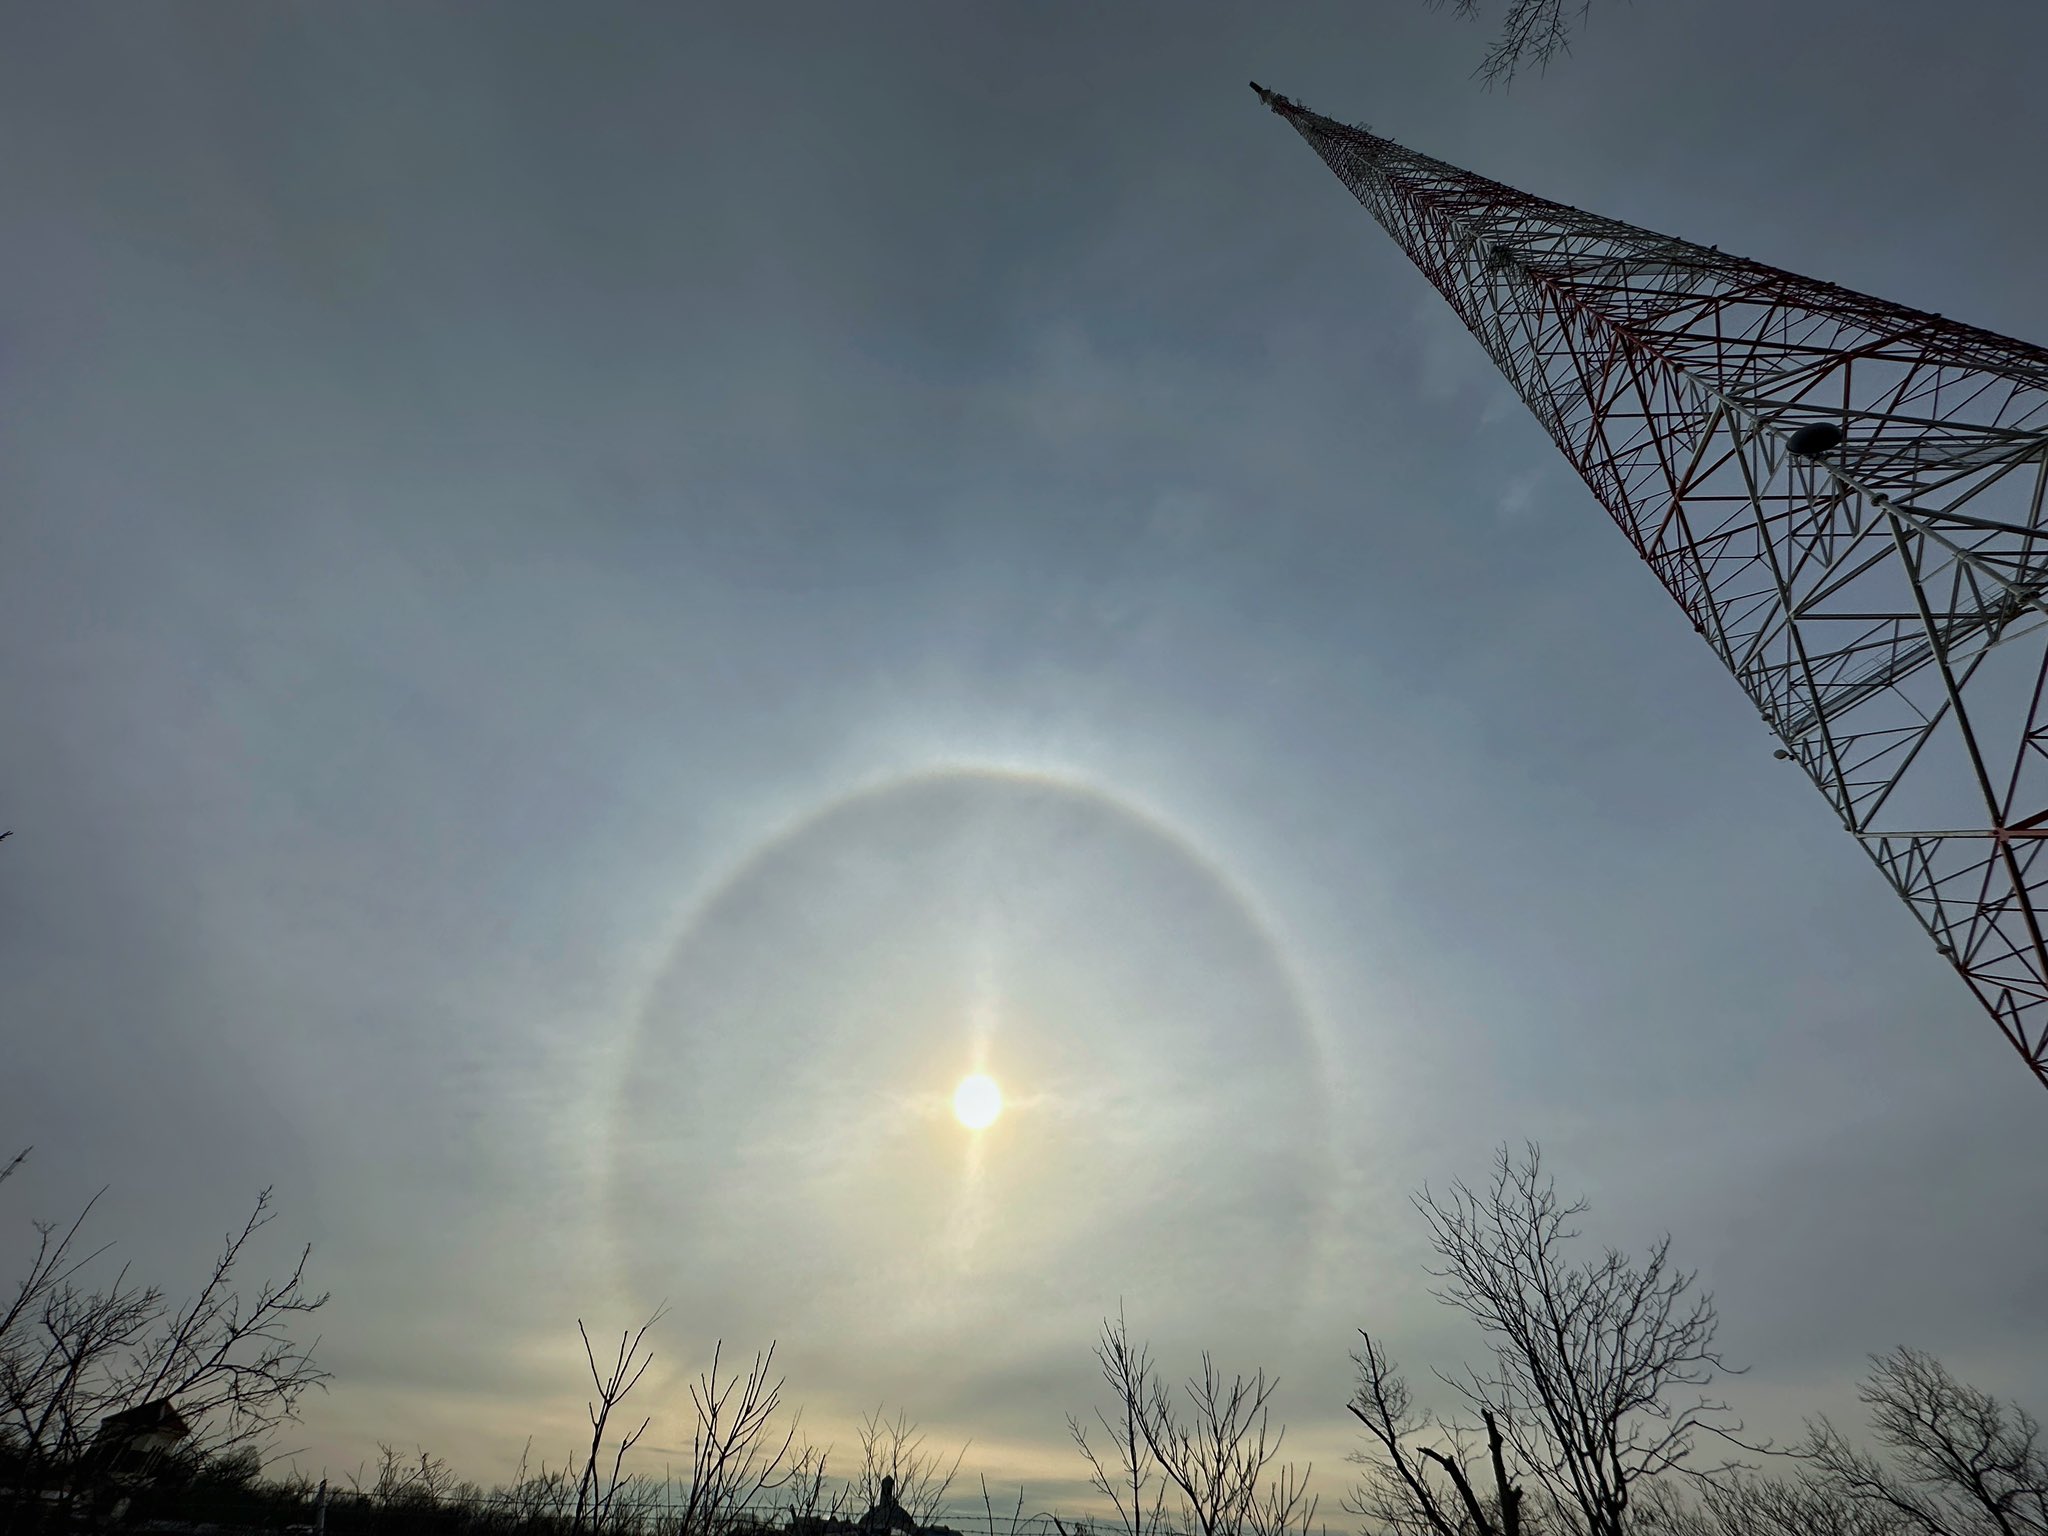 Brad Maushart on X: “A ring around the old scareball means that rain is  likely soon to fall.” This bright ring is a 22° halo formed when light is  refracted at a